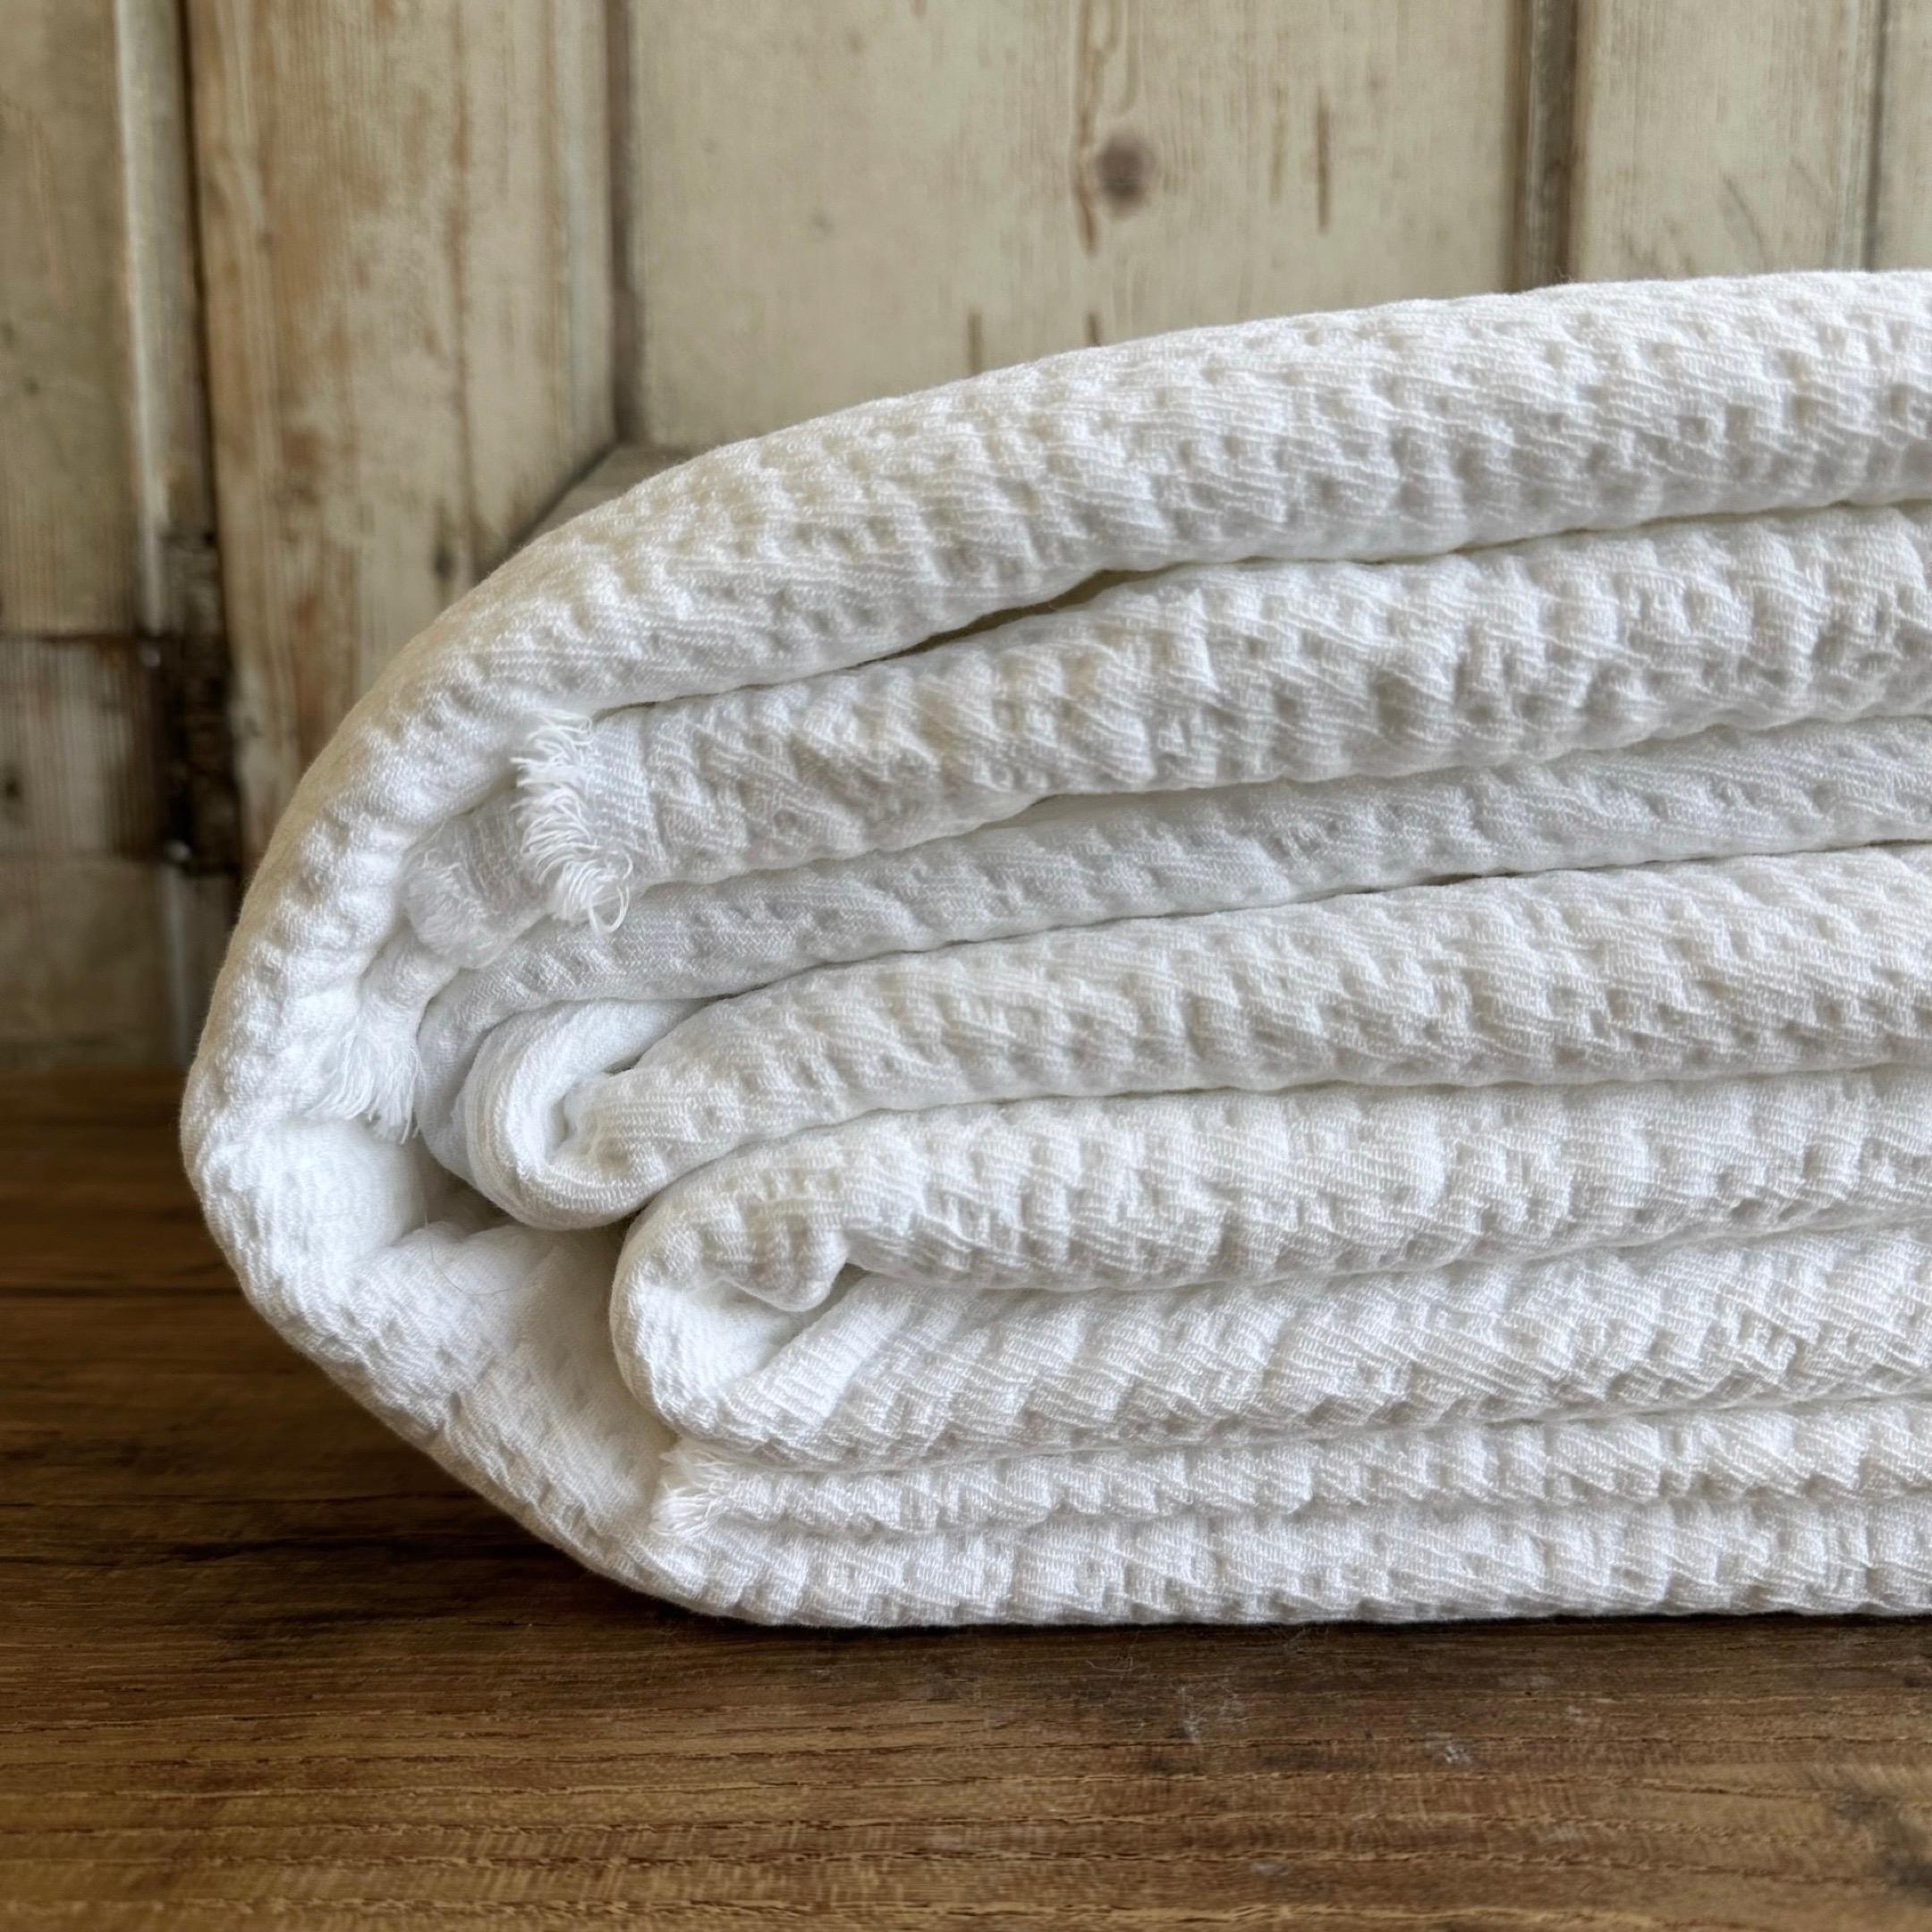 Beautiful Cotton Coverlet in a Muted or deep hue will add a luxurious softness to your bed. Available in bed sizes and throws.
These are our favorite new coverlets due to their softness. 
MADE IN FRANCE.

Care: Unfold your product before